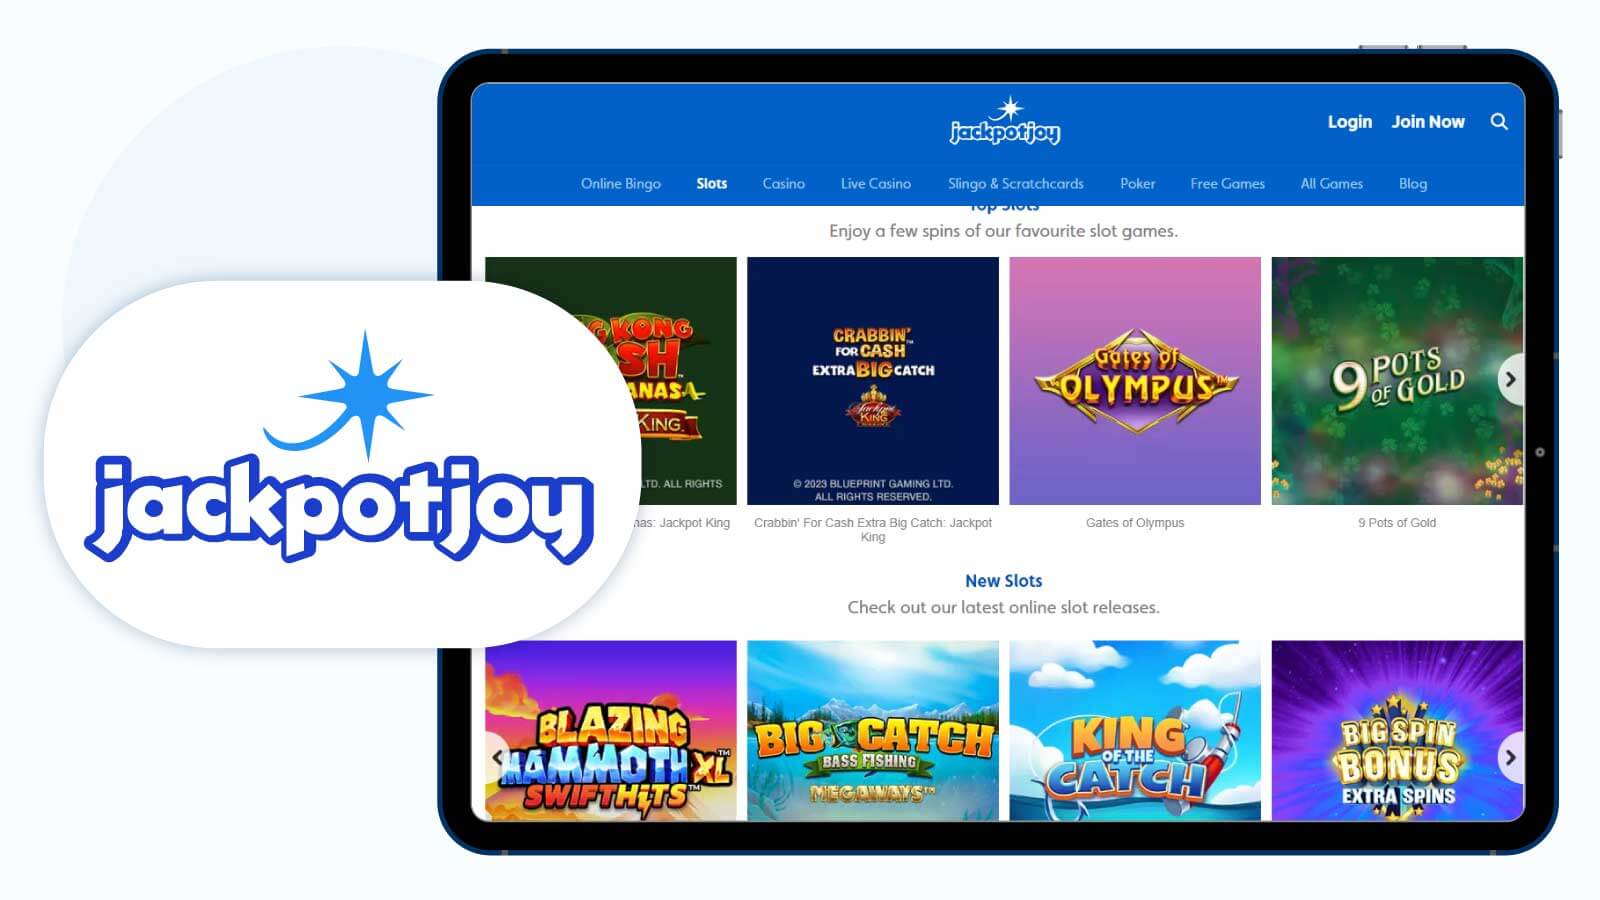 Jackpotjoy Casino – Best Eyecon Casino with A High Monthly Cashout